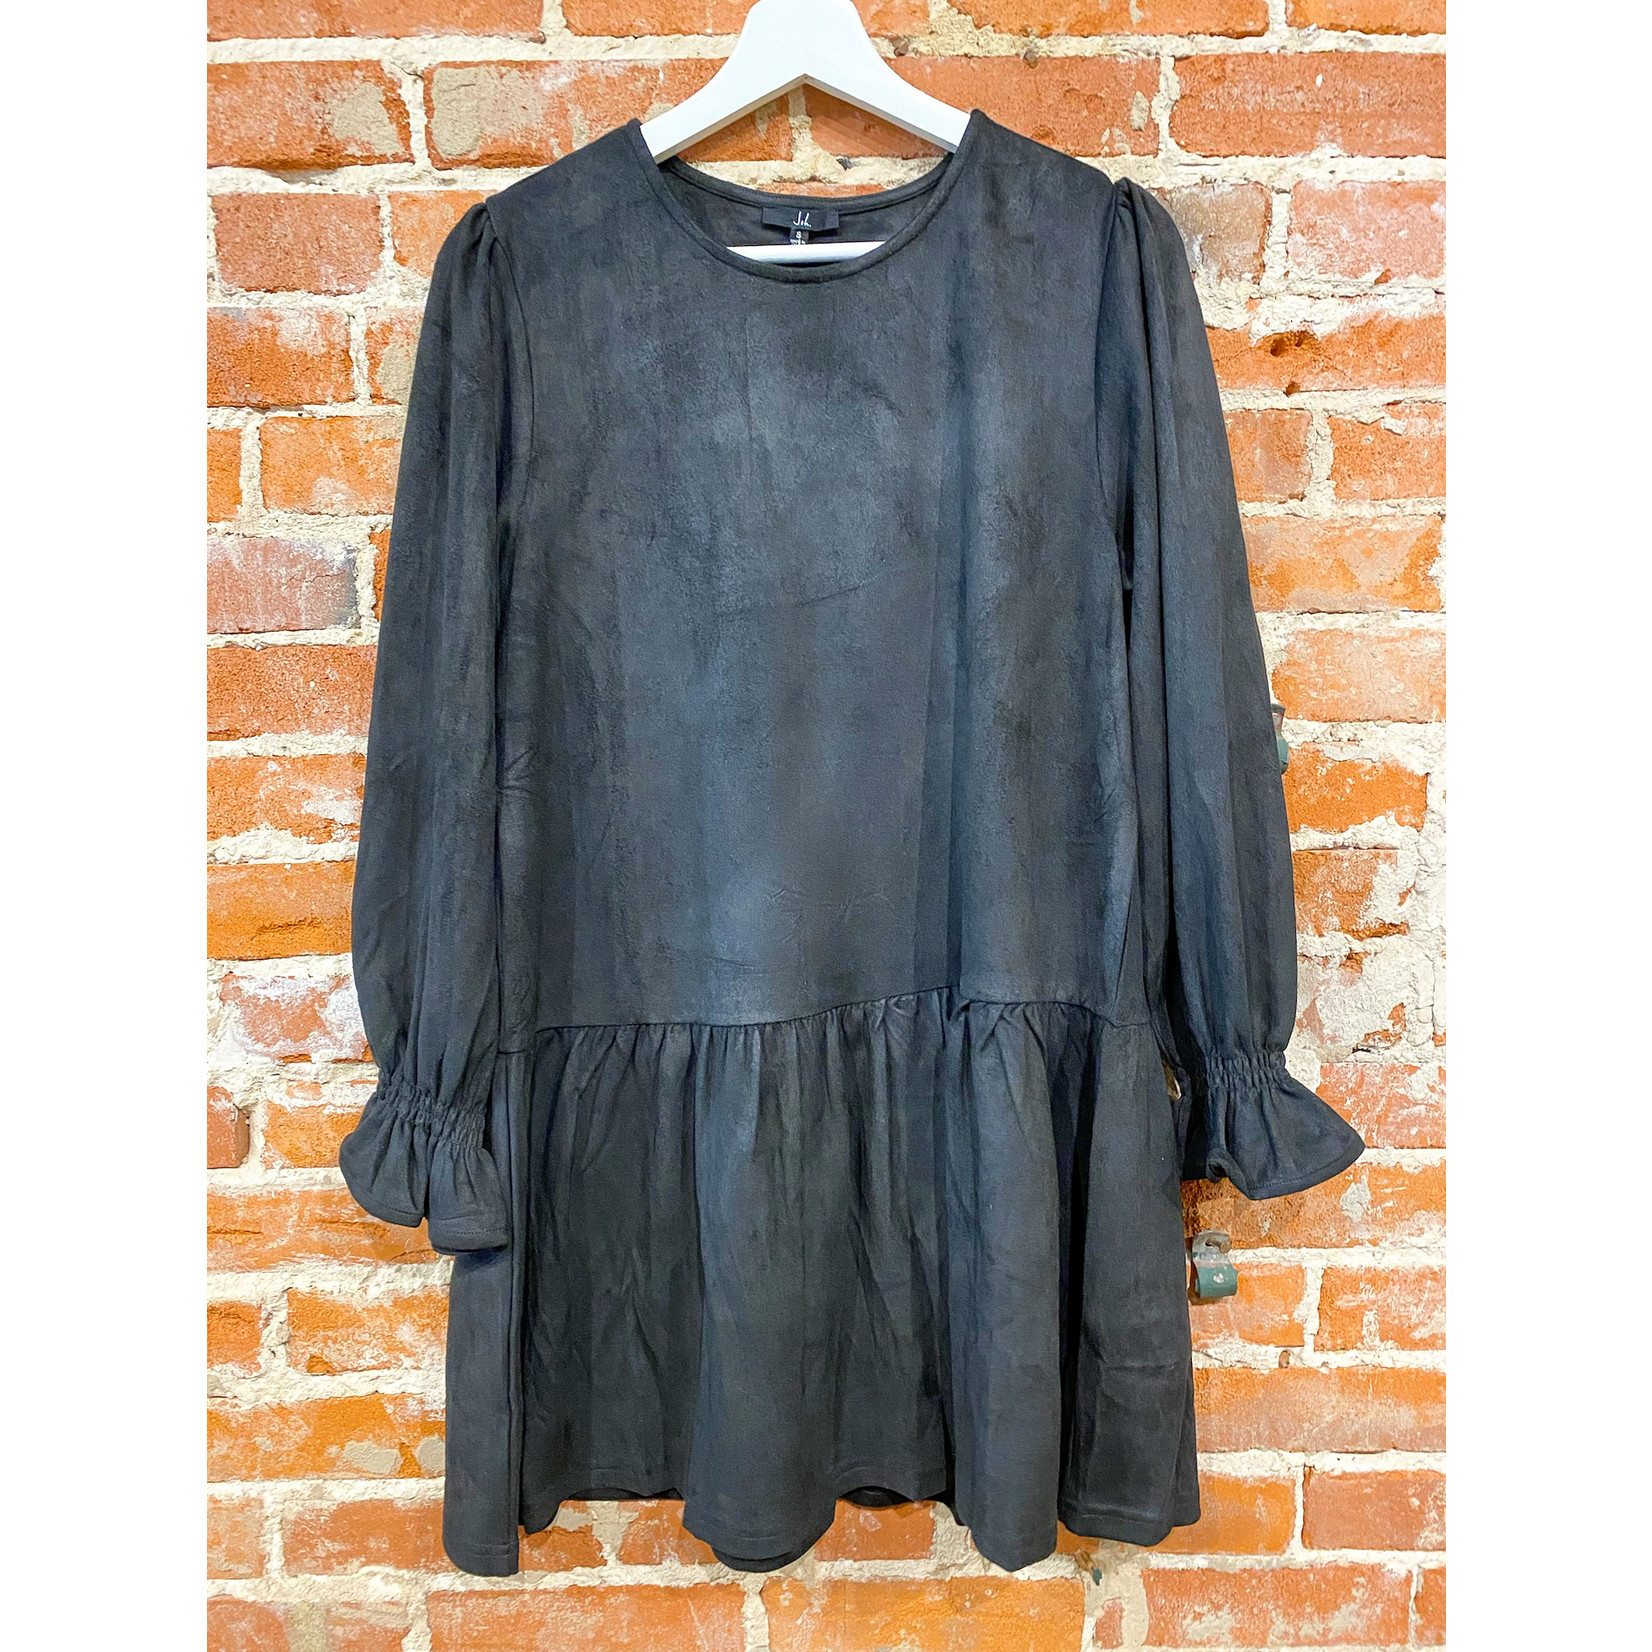 JOH Alize Suede Tunic